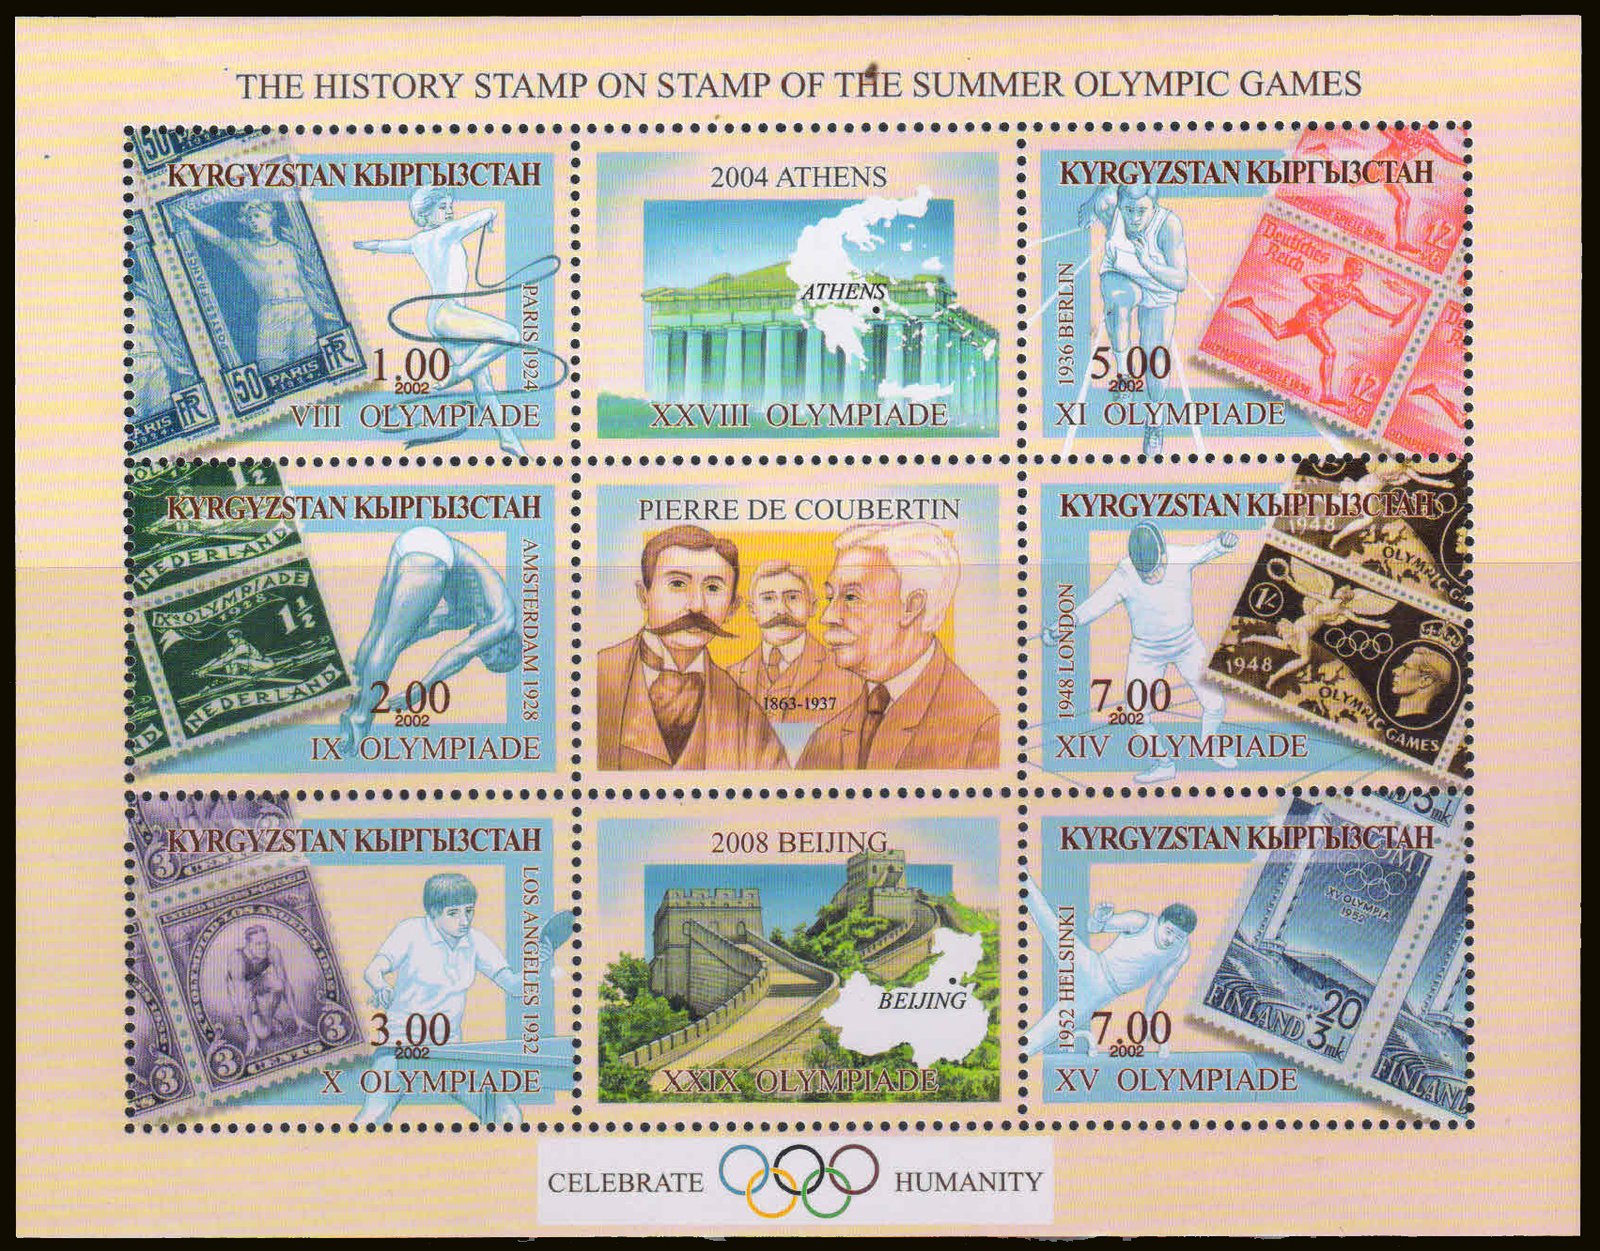 KYRGYZSTAN 2002-History of Summer Olympic, Gymnast, Table Tennis, Fencing, Sheet of 6 Stamps+3 Labels, S.G. 256b